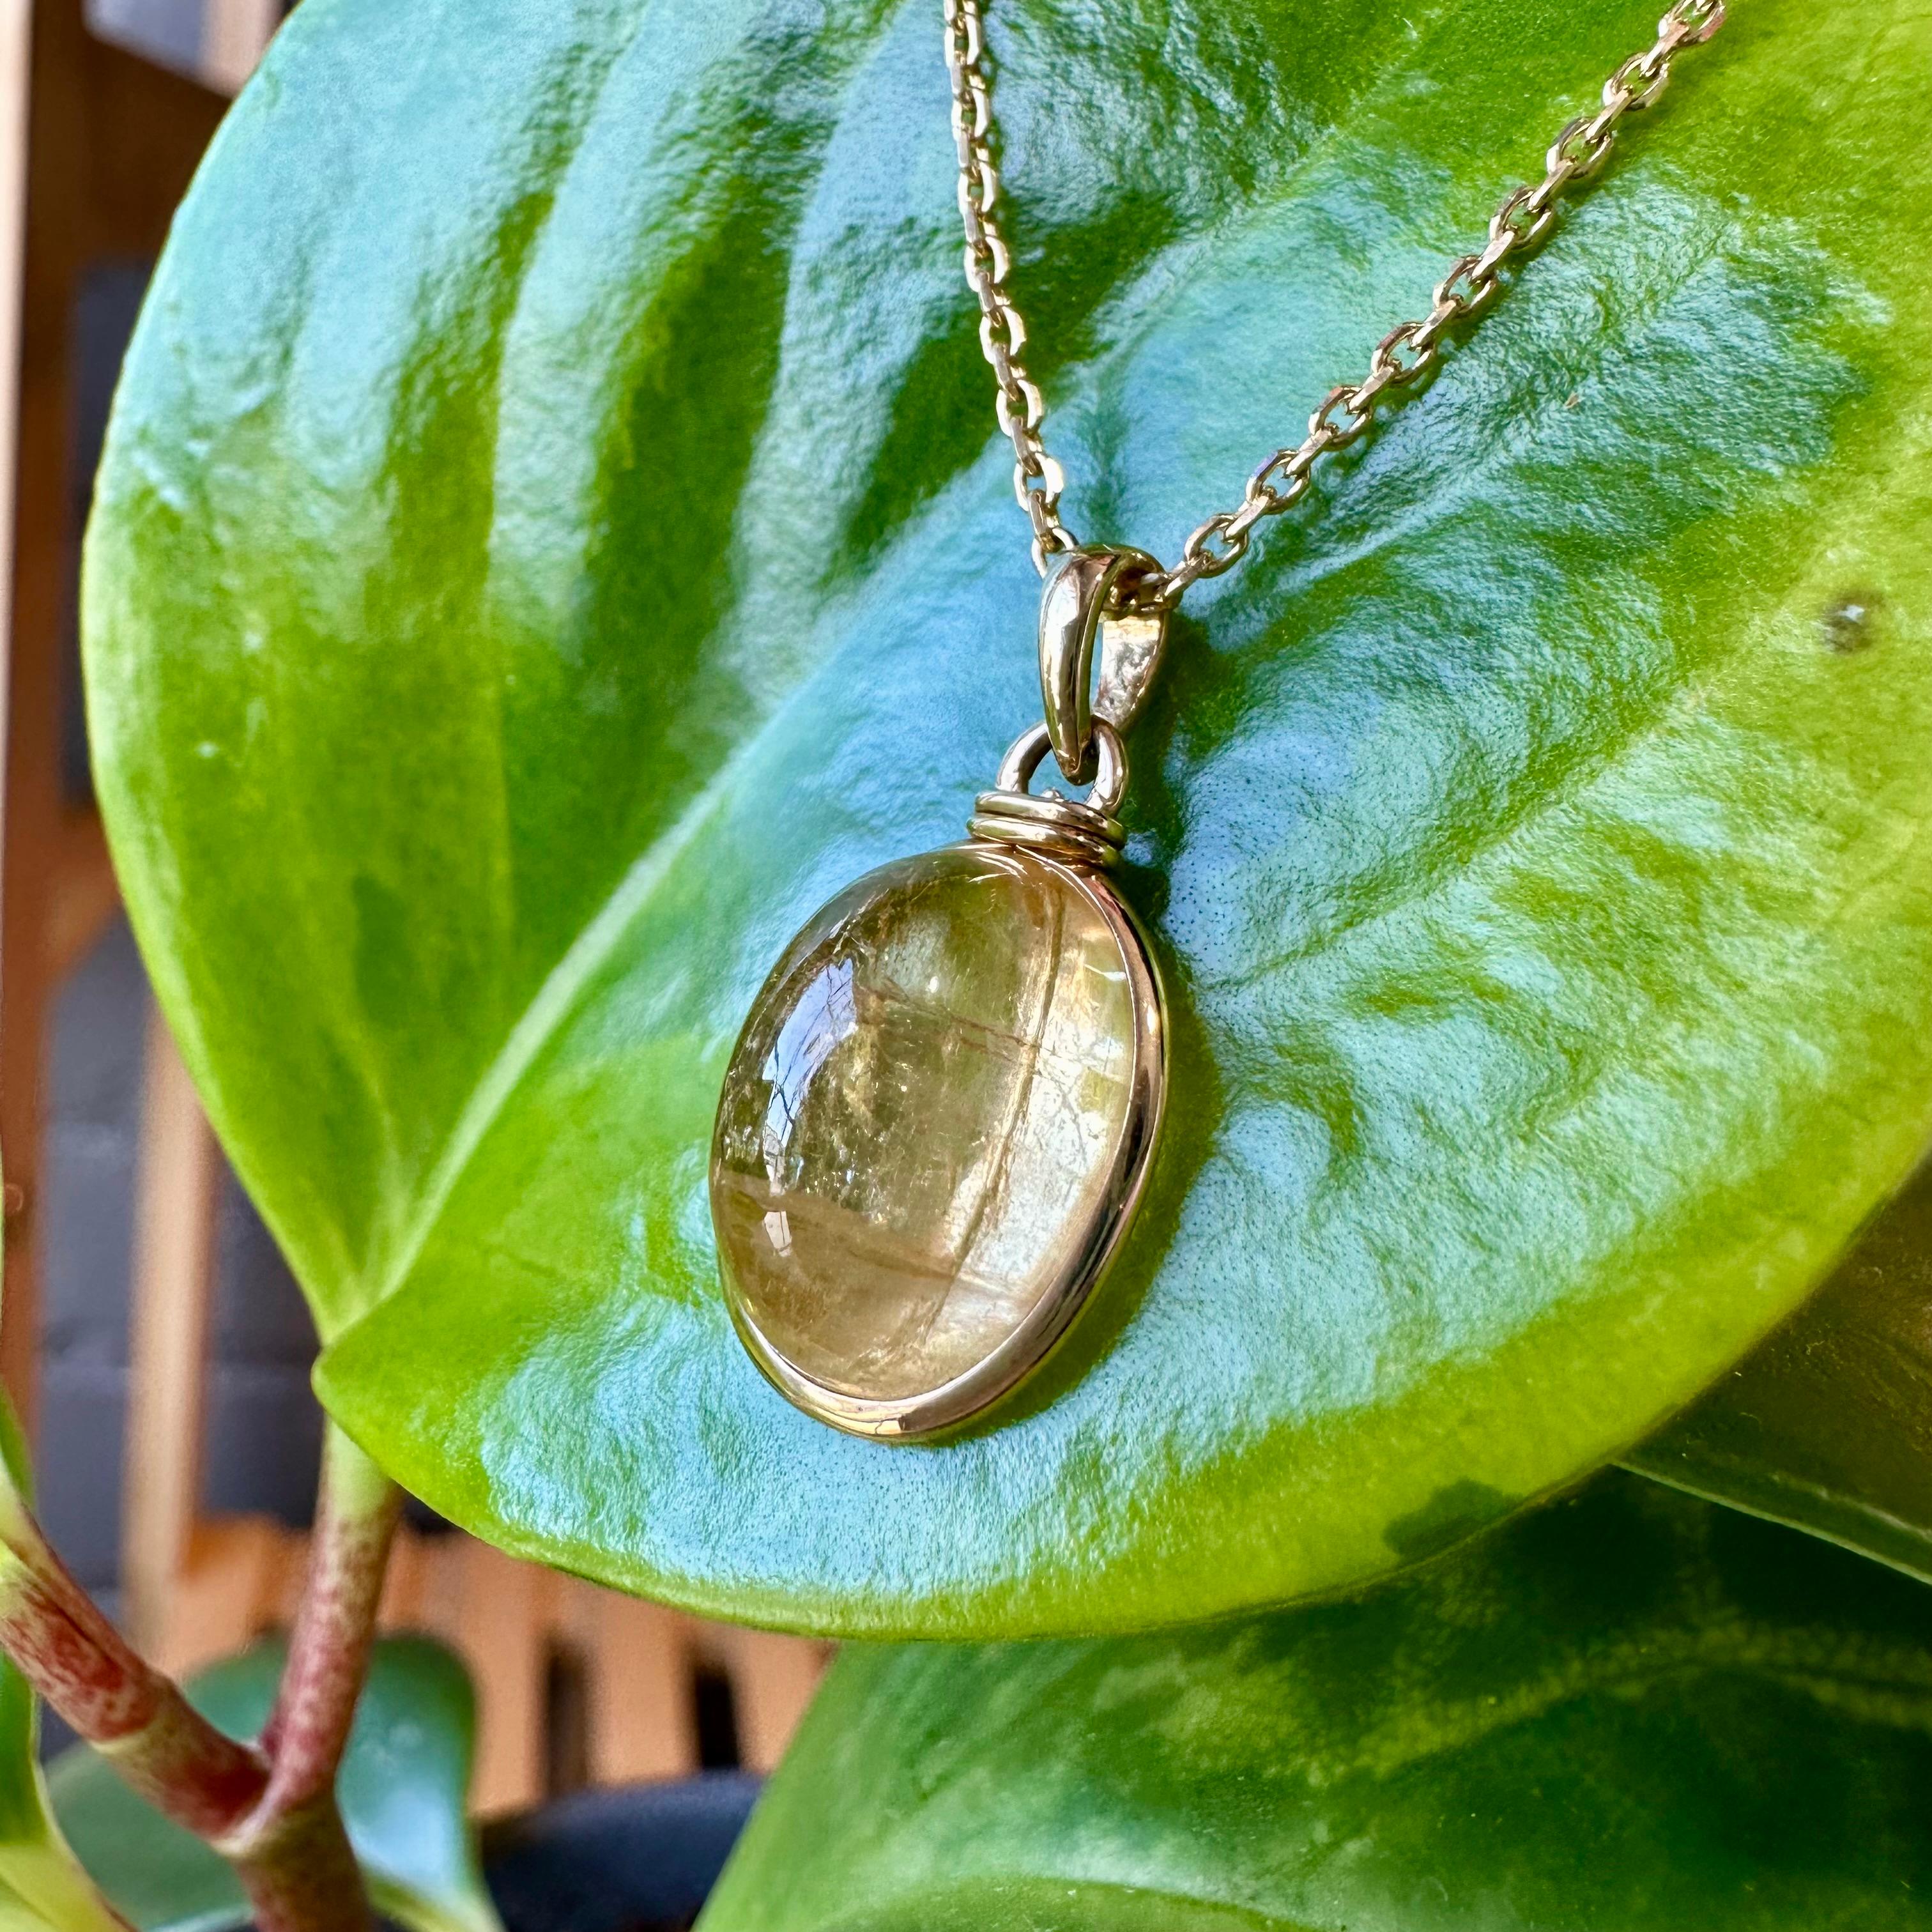 Wear a delicious, crystalized drop of sun-soaked honey with this citrine and 14k gold pendant necklace. The natural inclusions in the citrine cabochon let the stone glow in any light, and the yellow gold bezel setting enhances its sunny warmth.